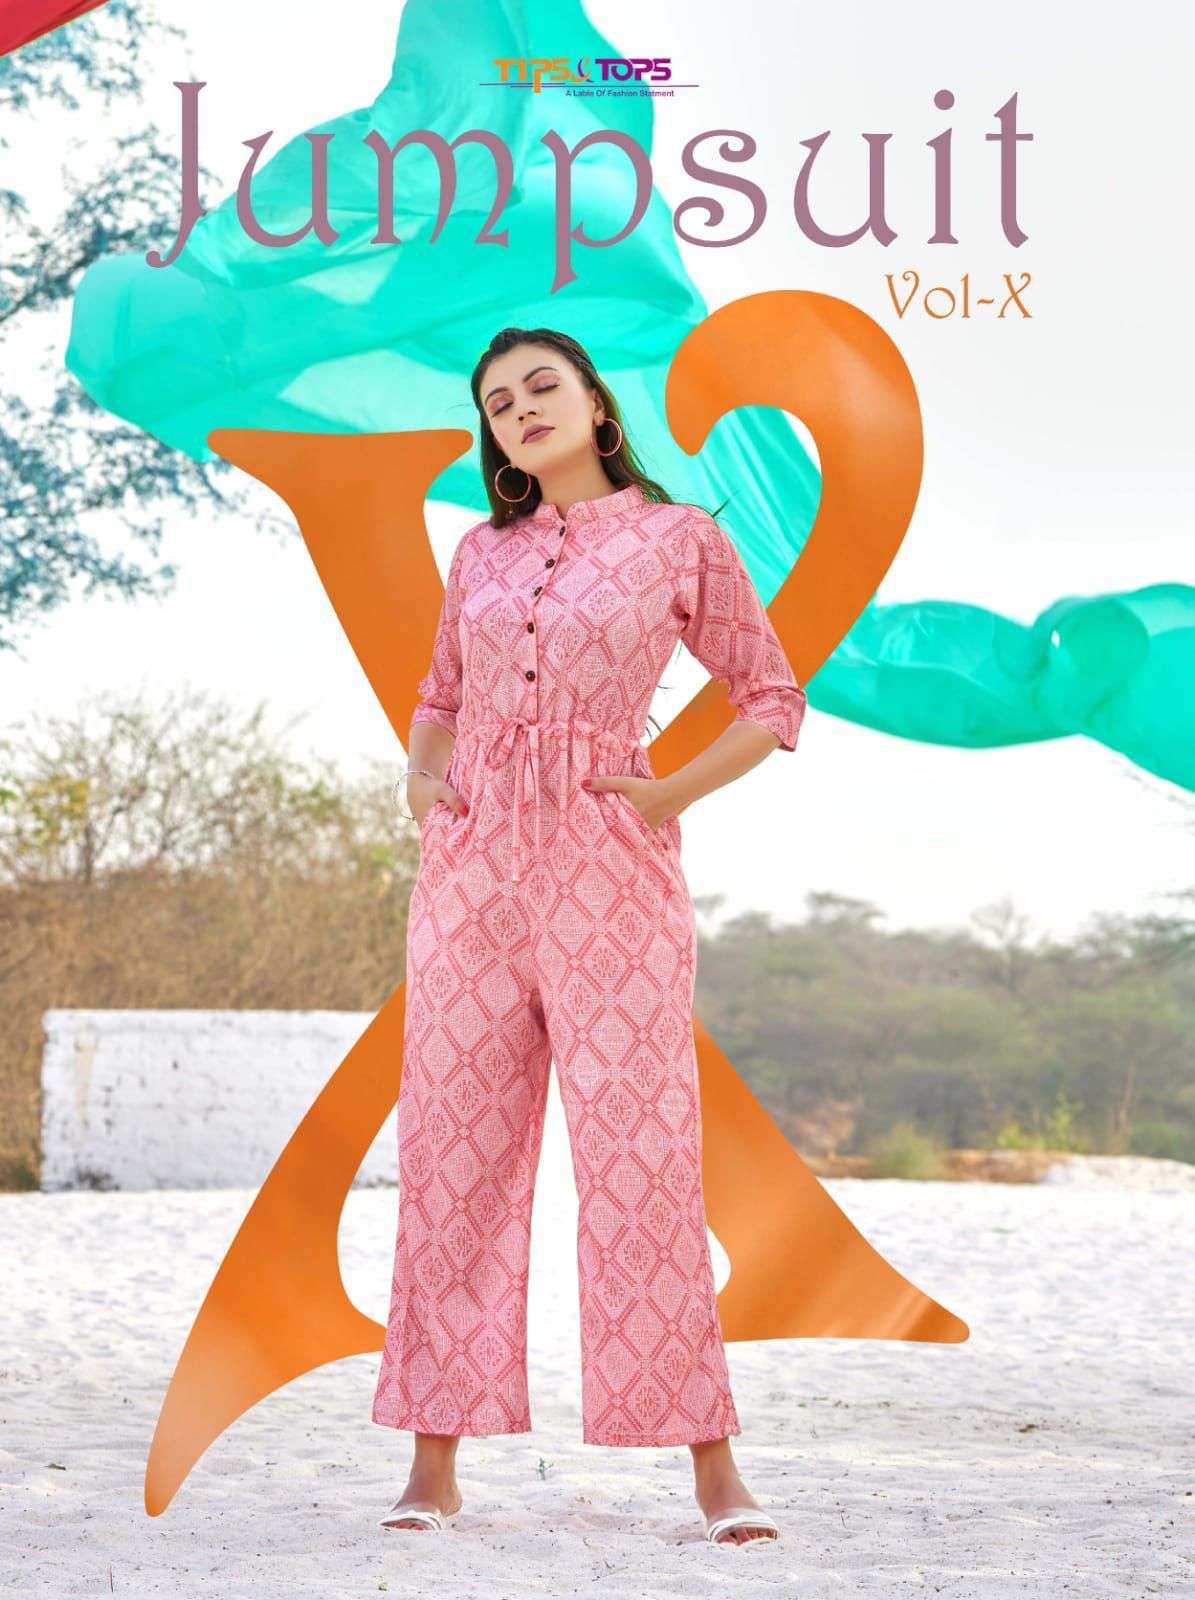 tips and tops jumpsuits vol 10 heavy rayon night wear collection wholesale price surat